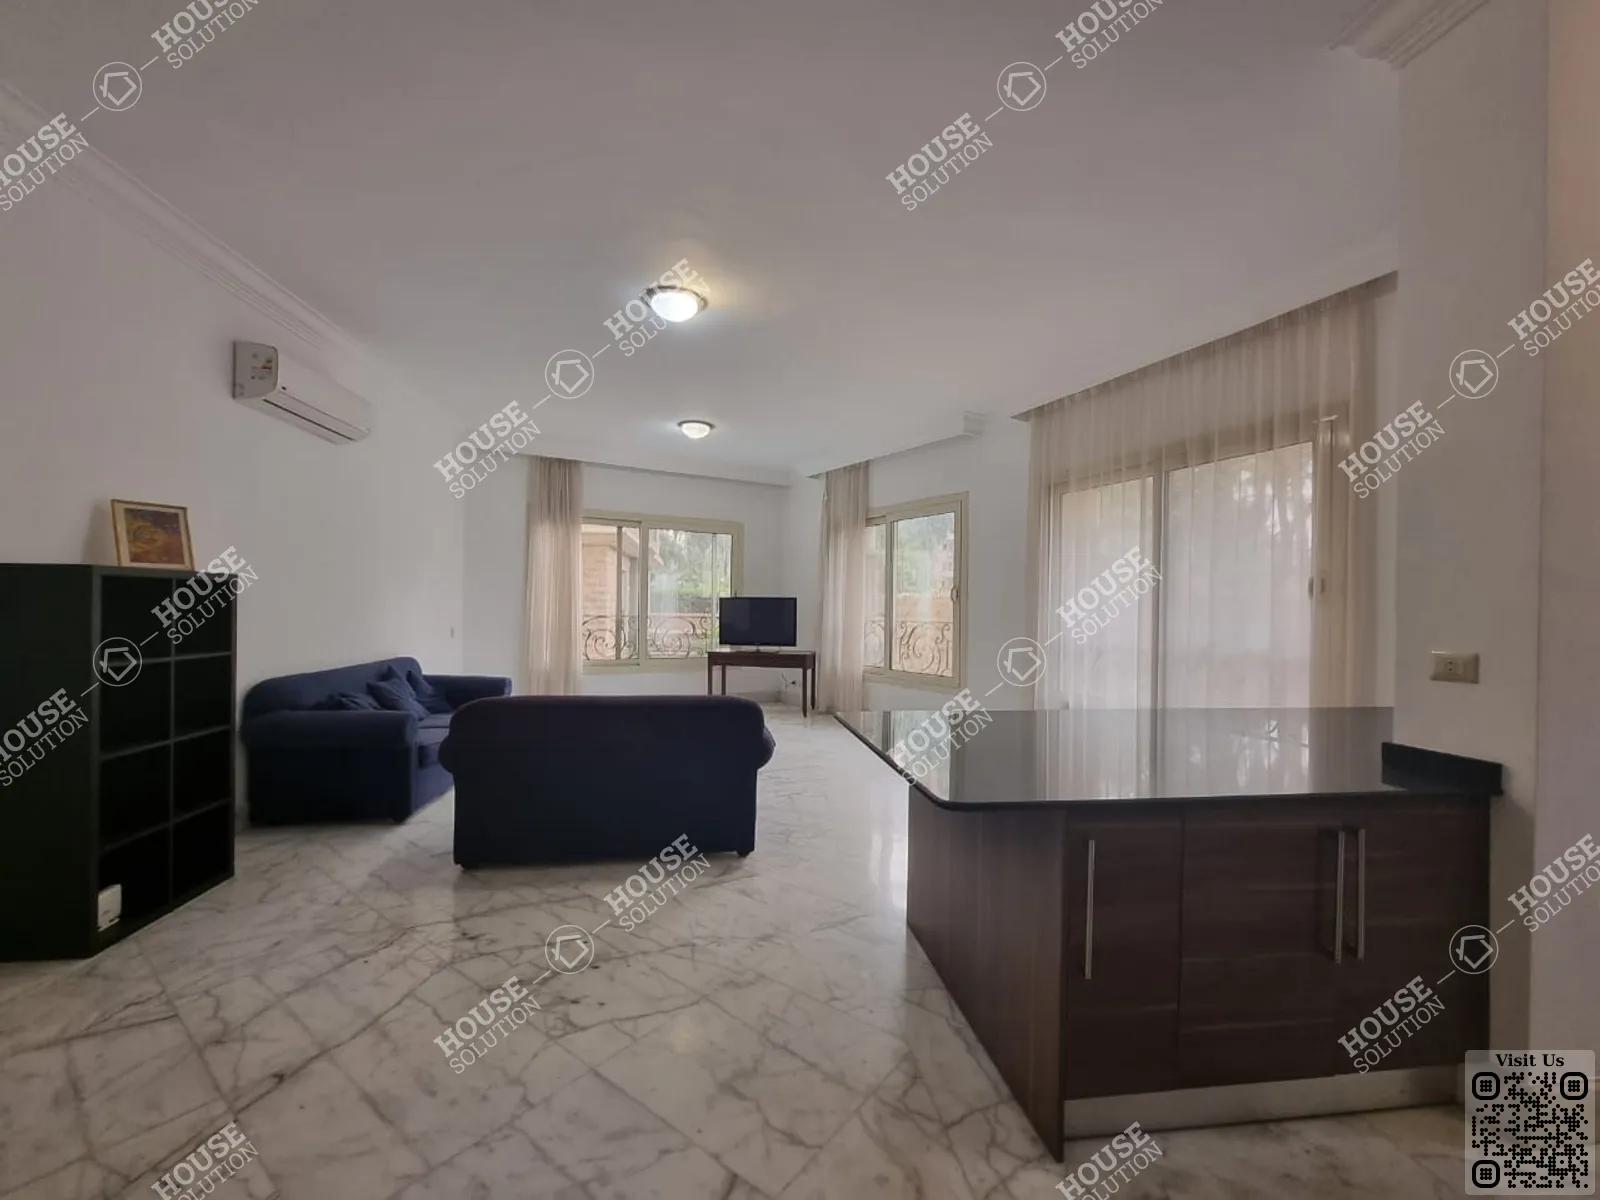 RECEPTION  @ Apartments For Rent In Maadi Maadi Sarayat Area: 170 m² consists of 2 Bedrooms 3 Bathrooms Modern furnished 5 stars #5268-0